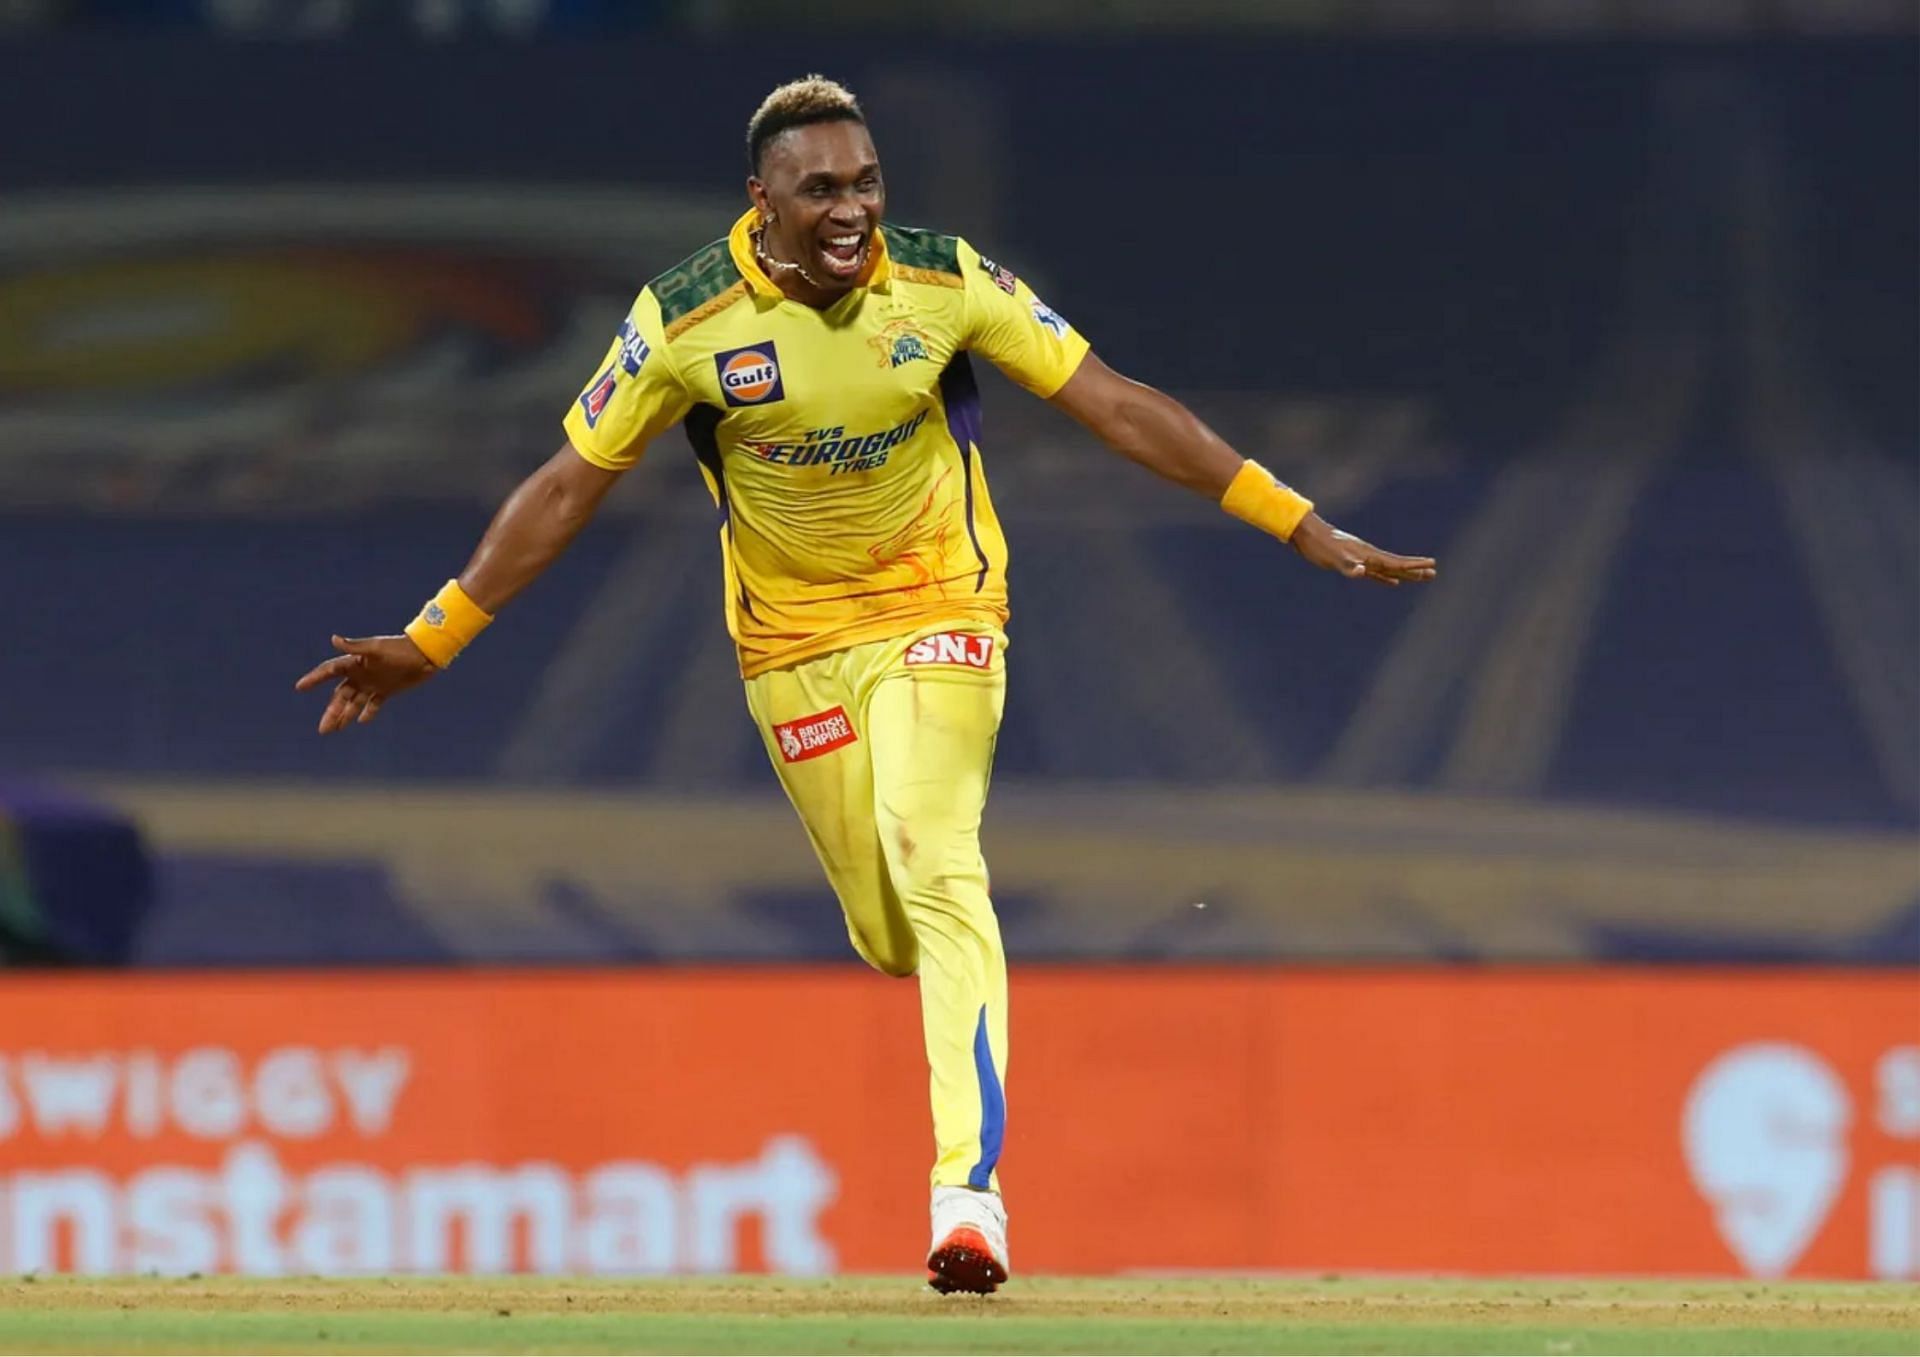 Dwayne Bravo was released by the Chennai Super Kings (CSK) ahead of the IPL 2023 Auction.